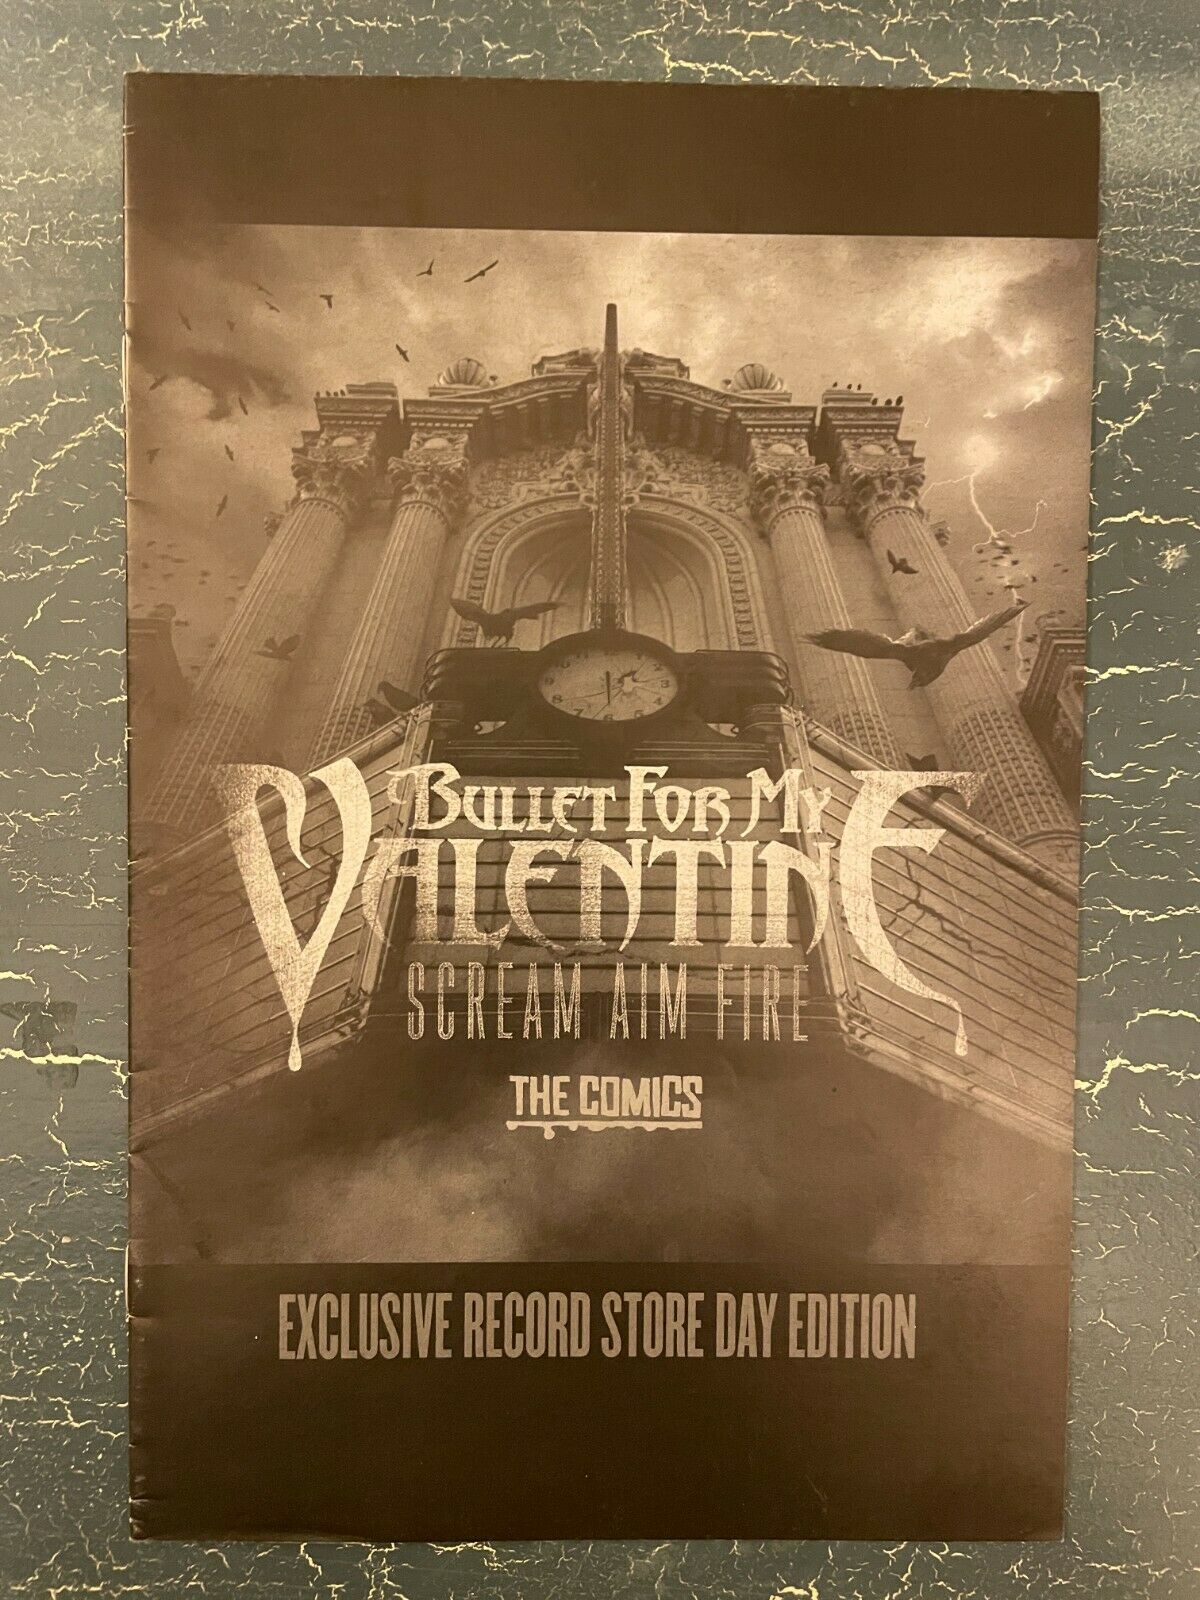 Bullet For My Valentine Scream Aim Fire The Comics Record Store Day Edition Book